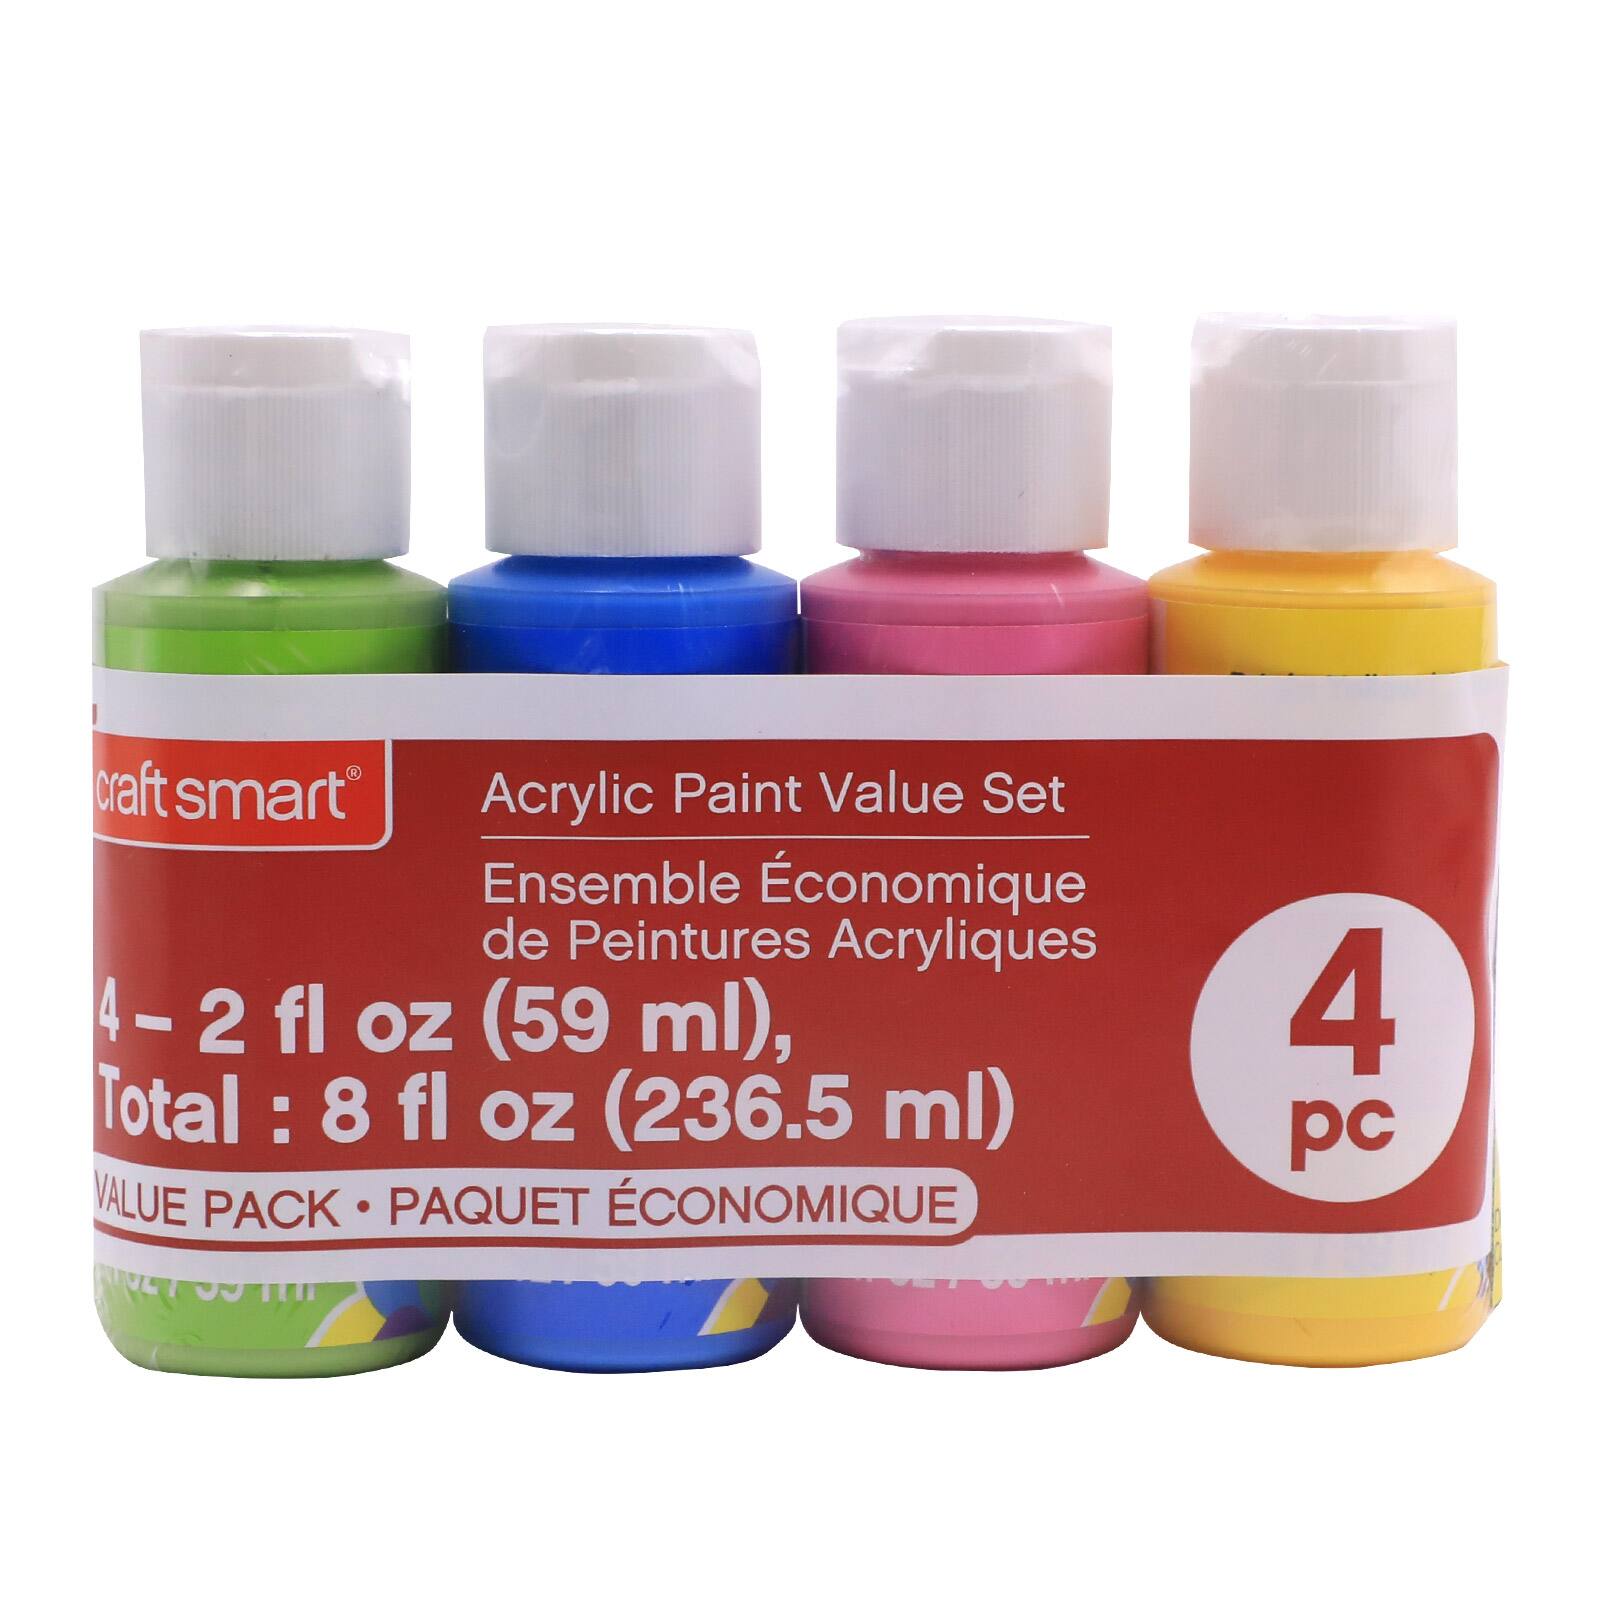 Craft Smart Acrylic Paint Value Pack